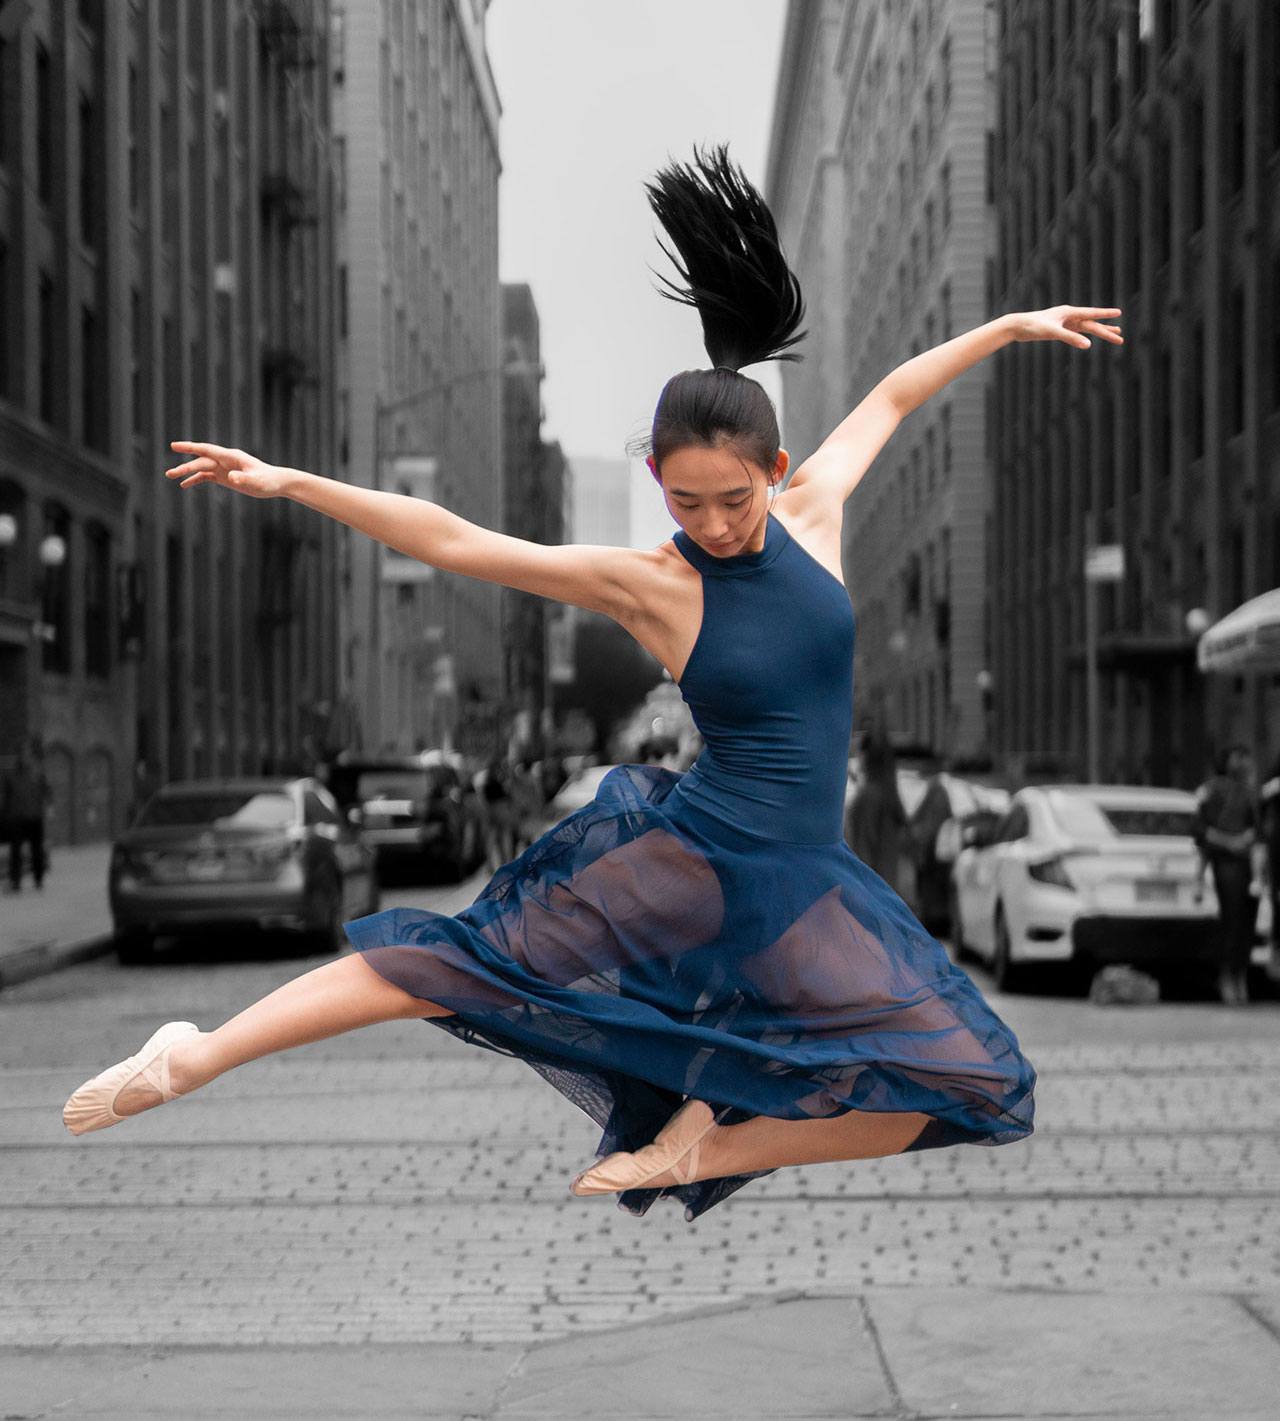 Dancer leaps in the air in the middle of a cobblestone street in Brooklyn.